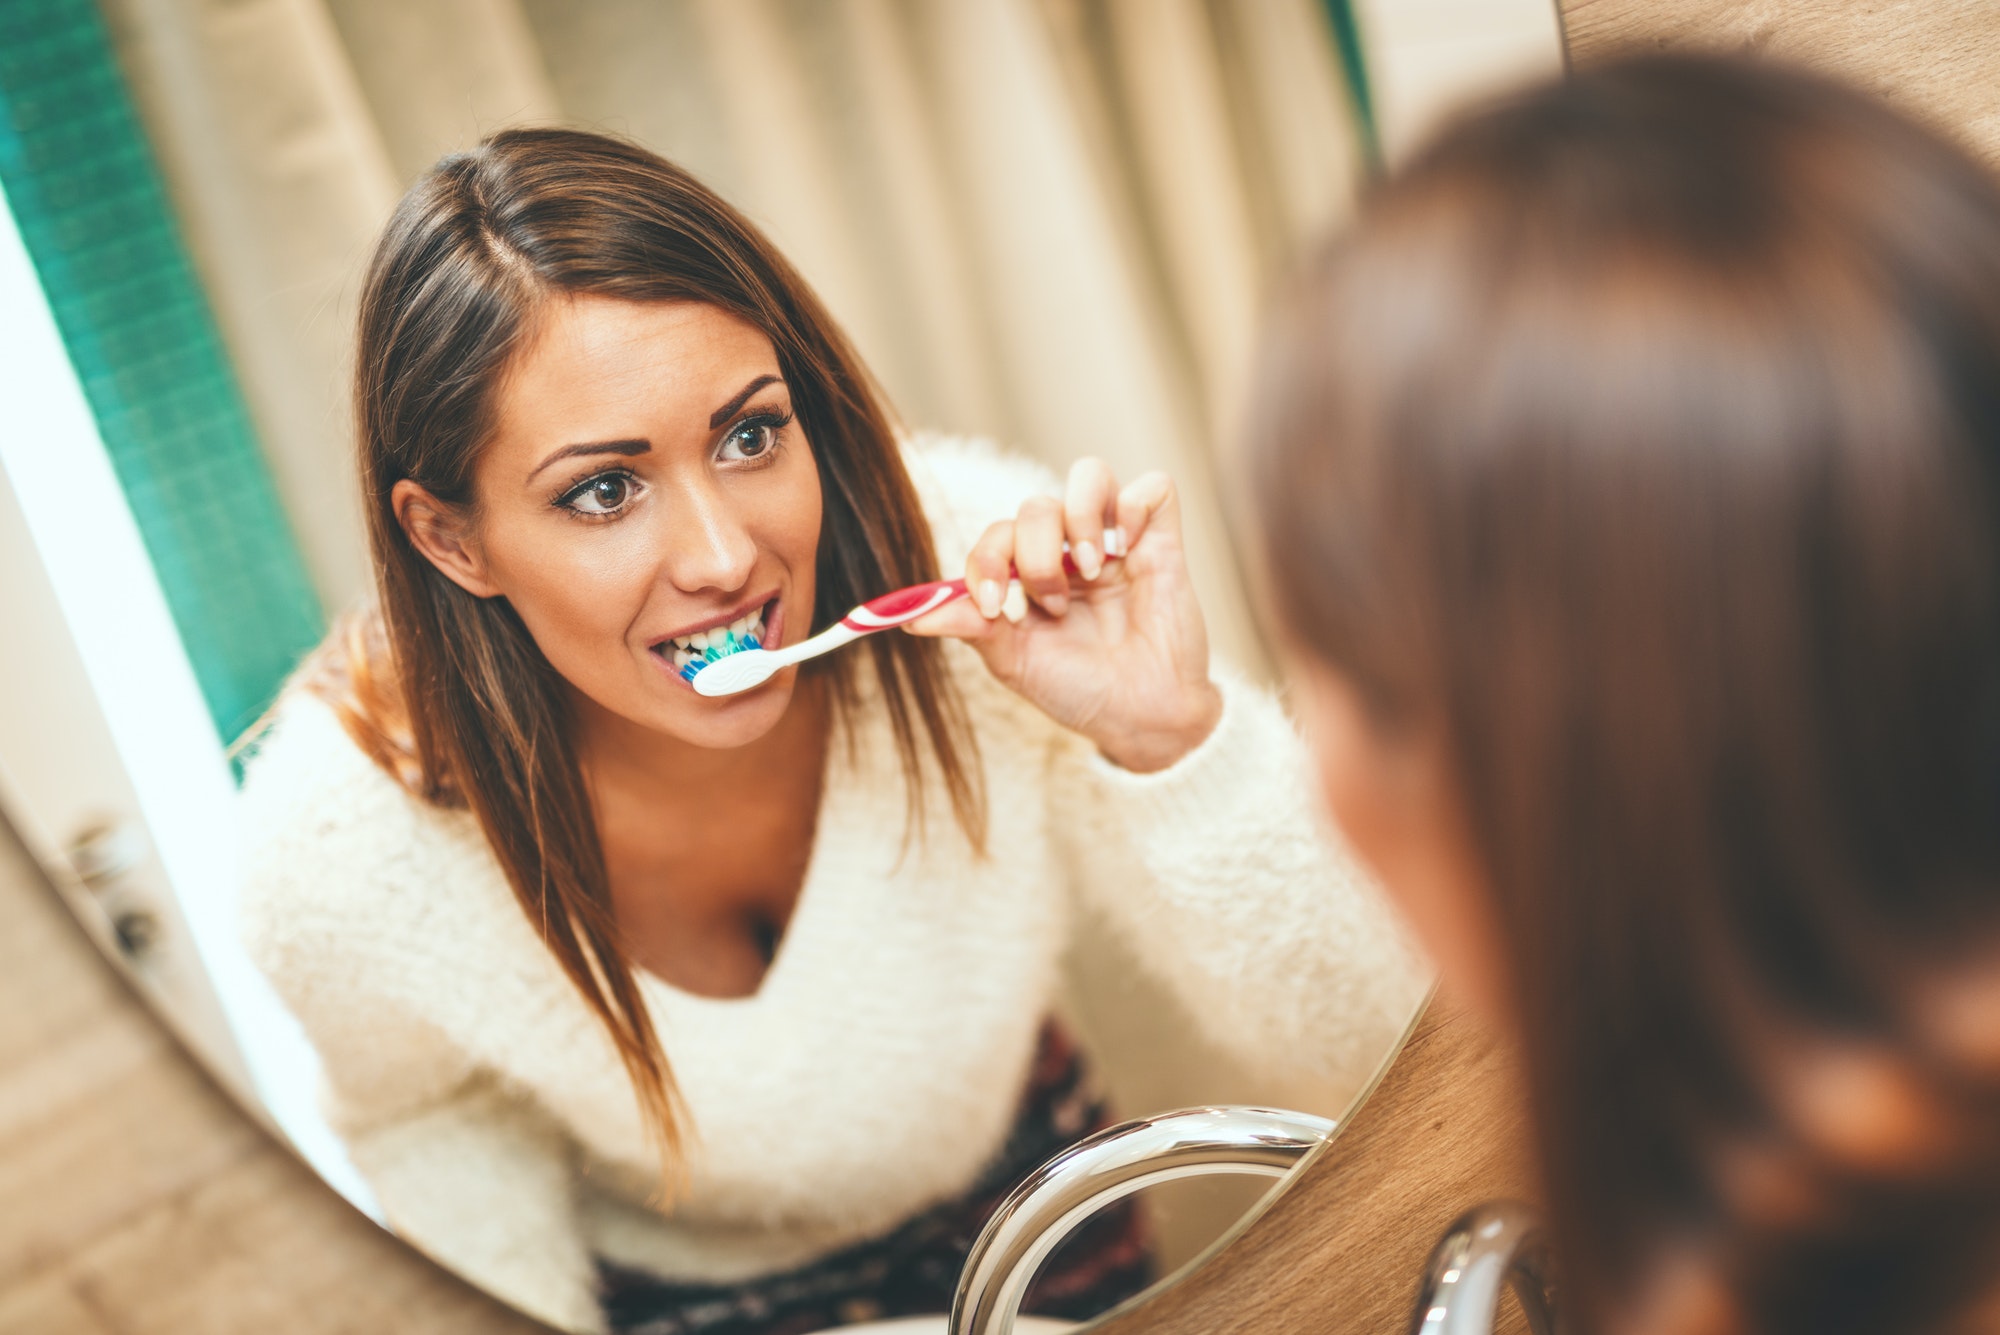 Smiling woman brushing teeth in mirror, emphasizing oral health's role in overall wellness - Des Moines Dental Associates.